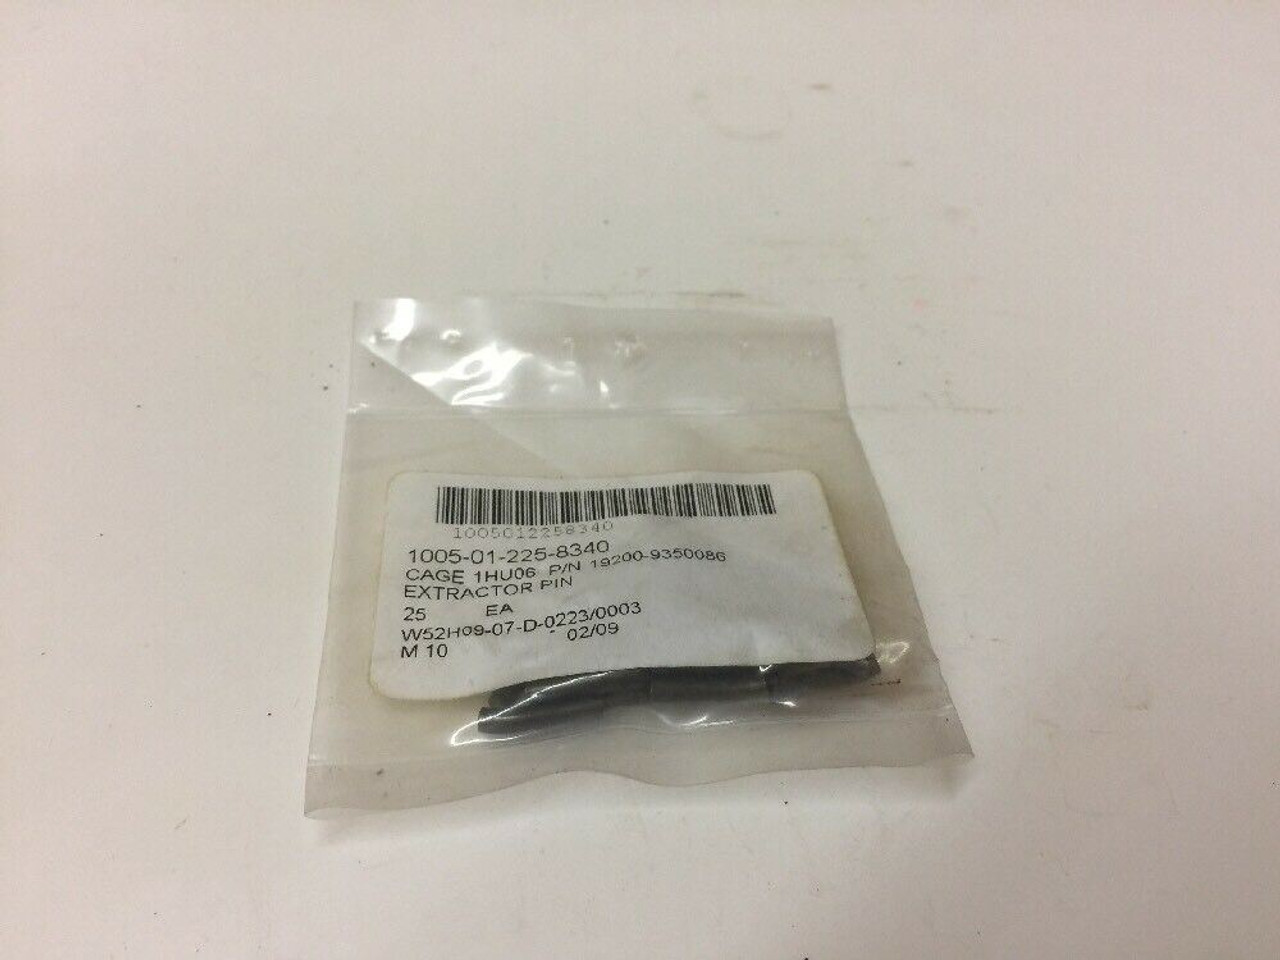 Extractor Pin 9350086 Black Military Lot of 25